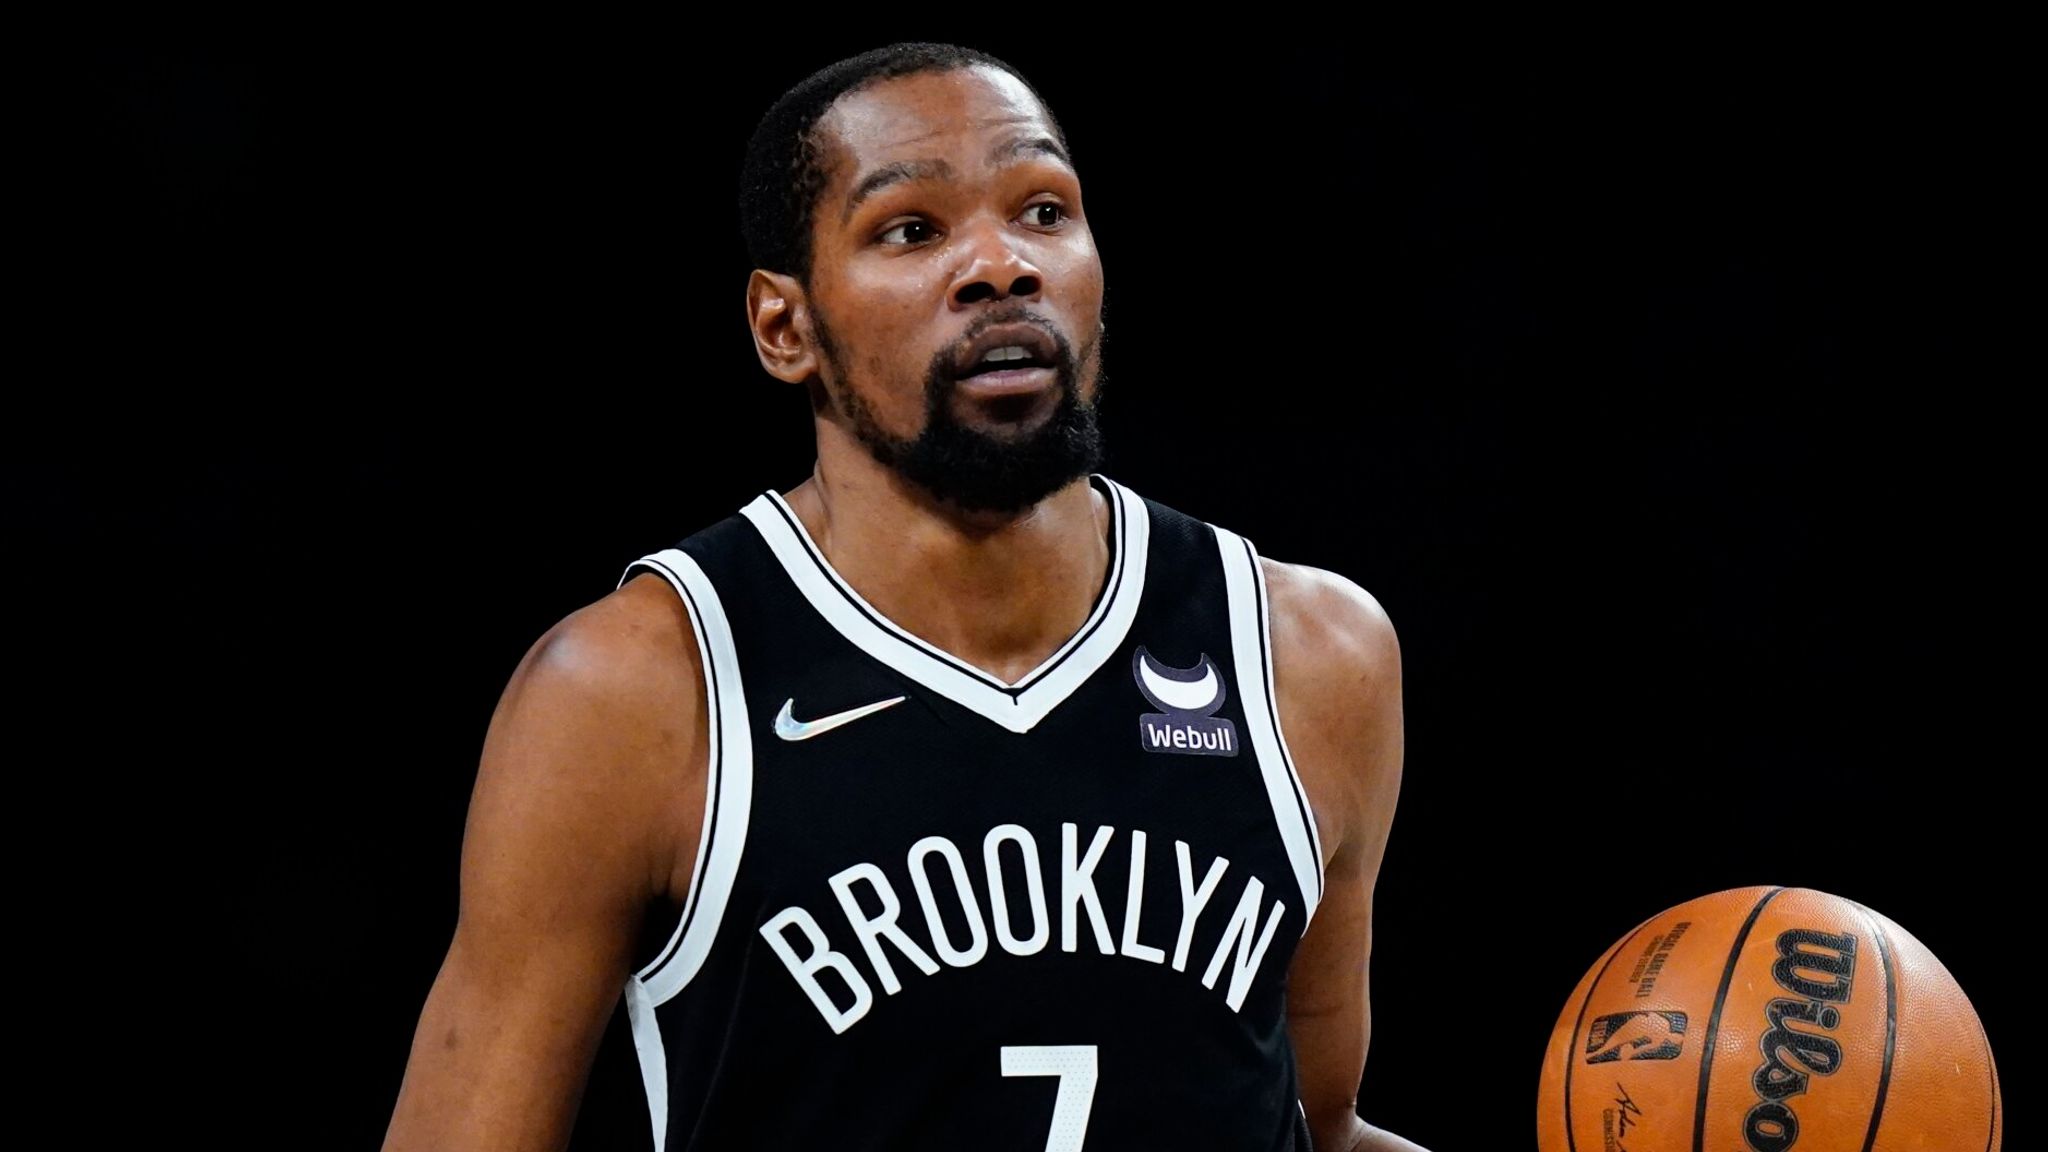 kevin durant nets  Kevin durant, Nba pictures, Best nba players